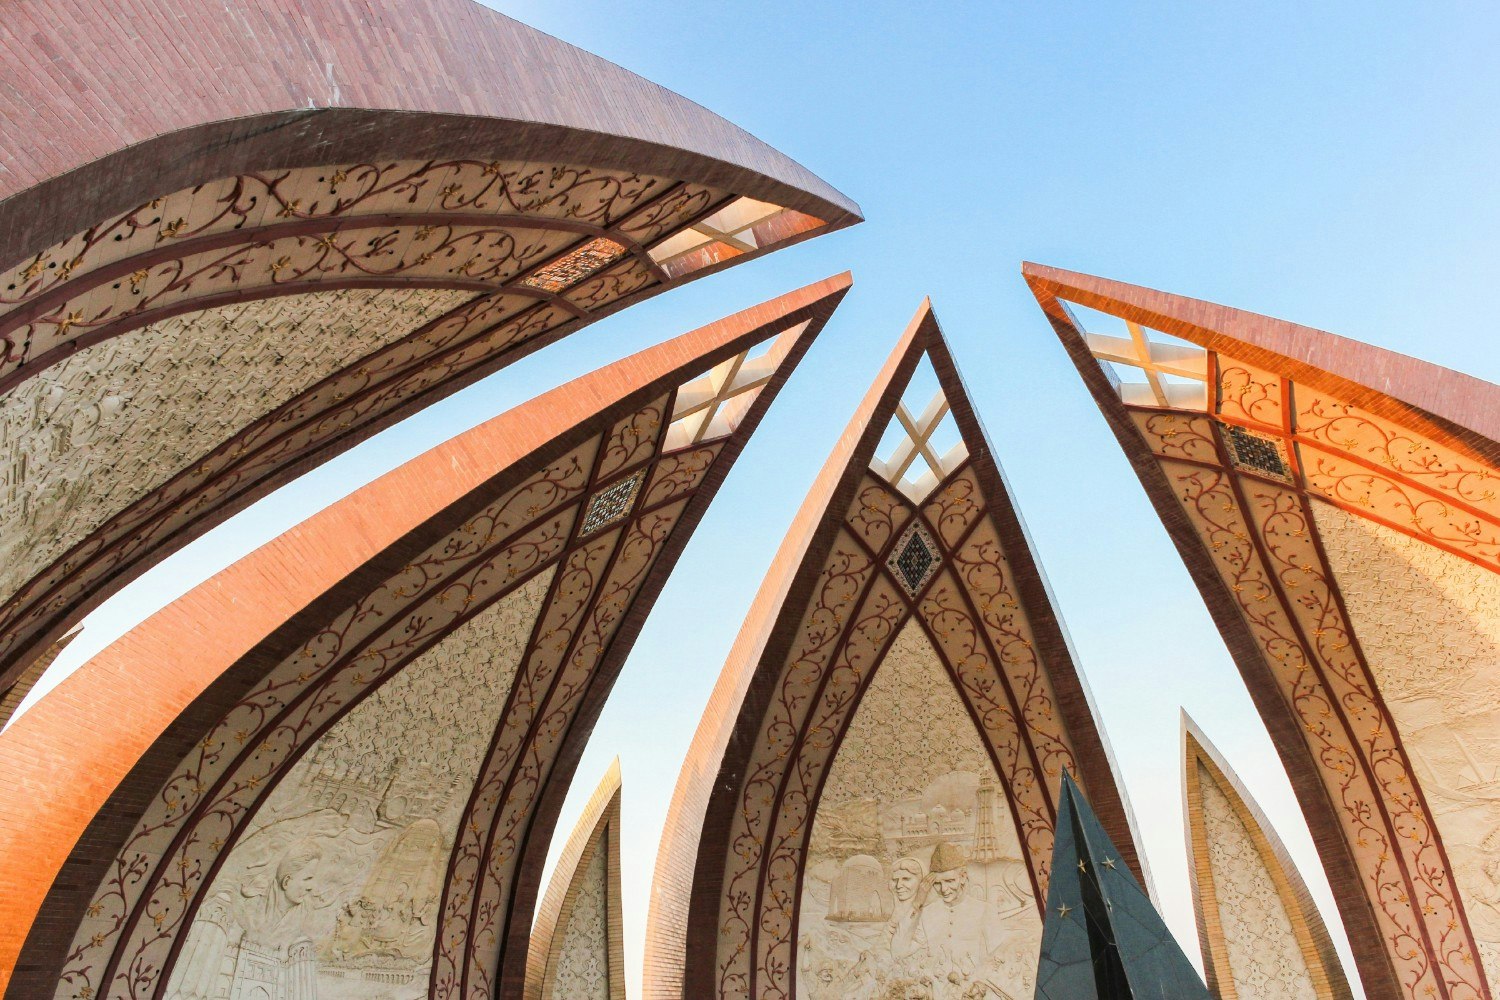 Elements of the Pakistan National Monument in Islamabad